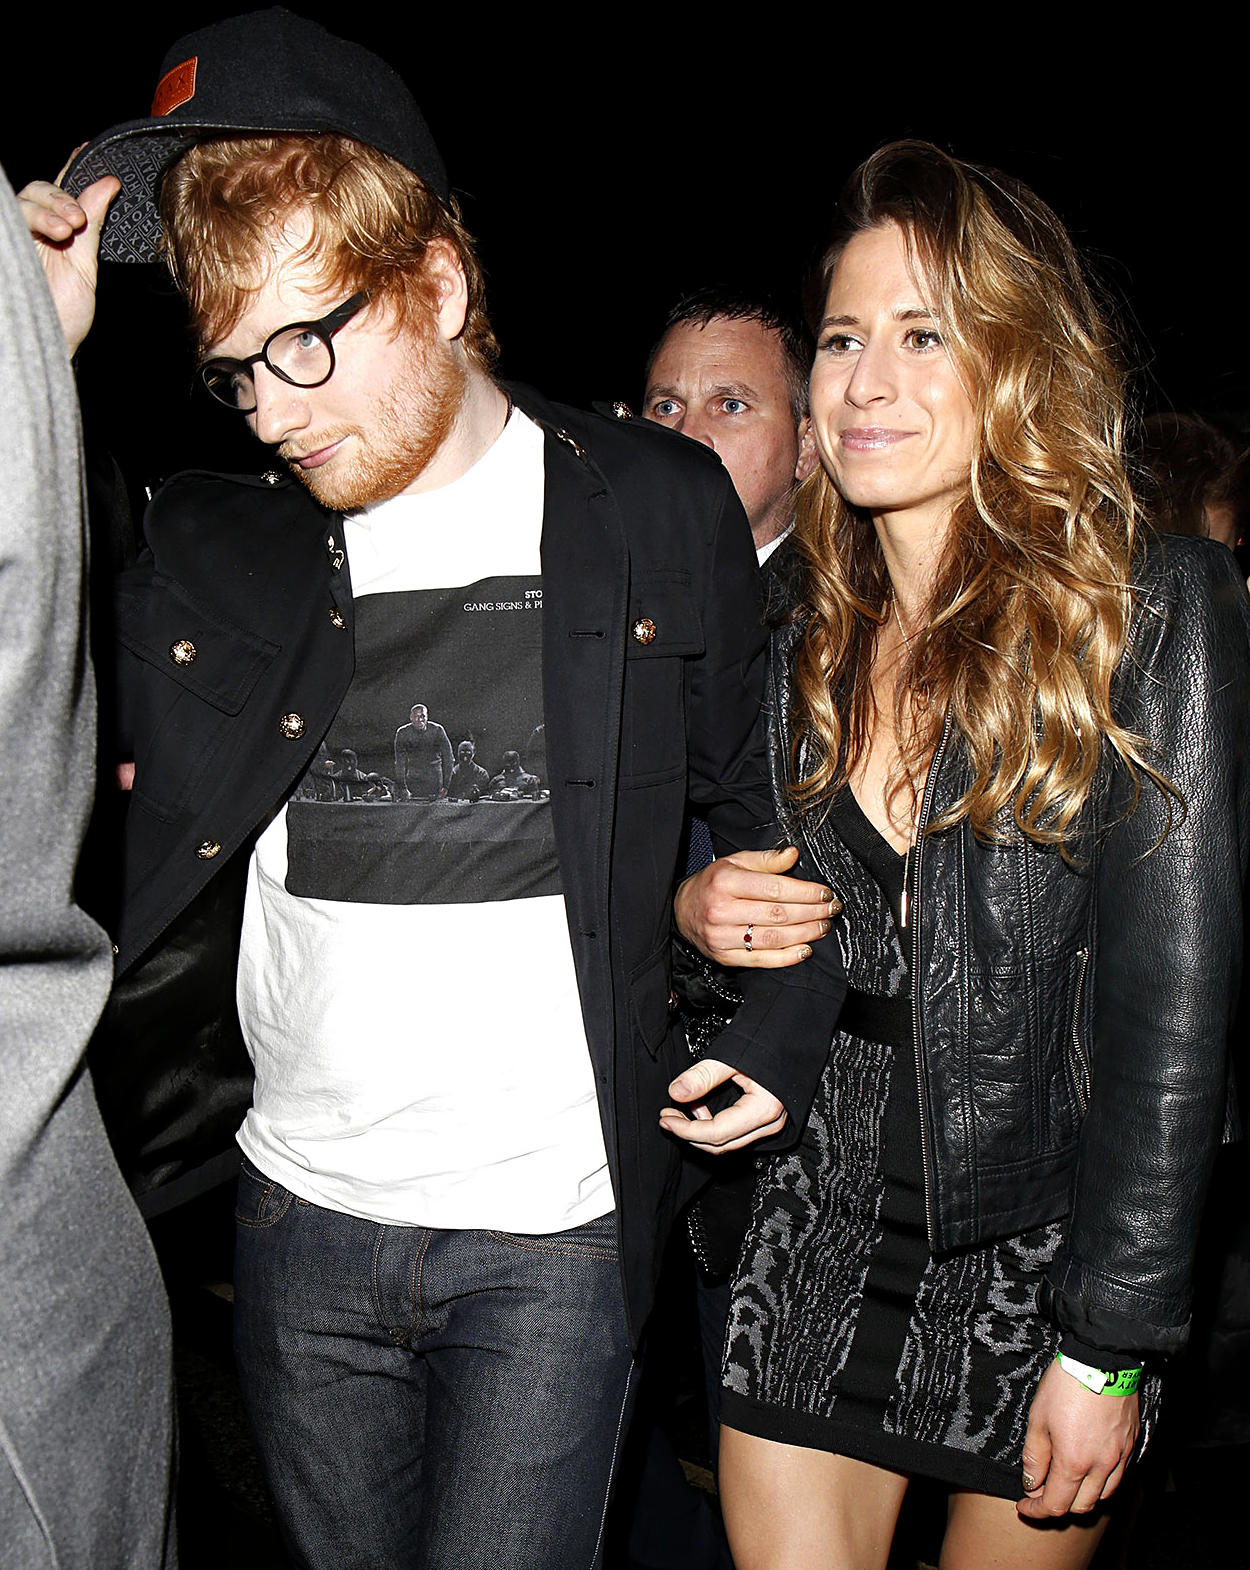 Ed Sheeran's Wife Cherry Seaborn Is Pregnant With Their 1st Child